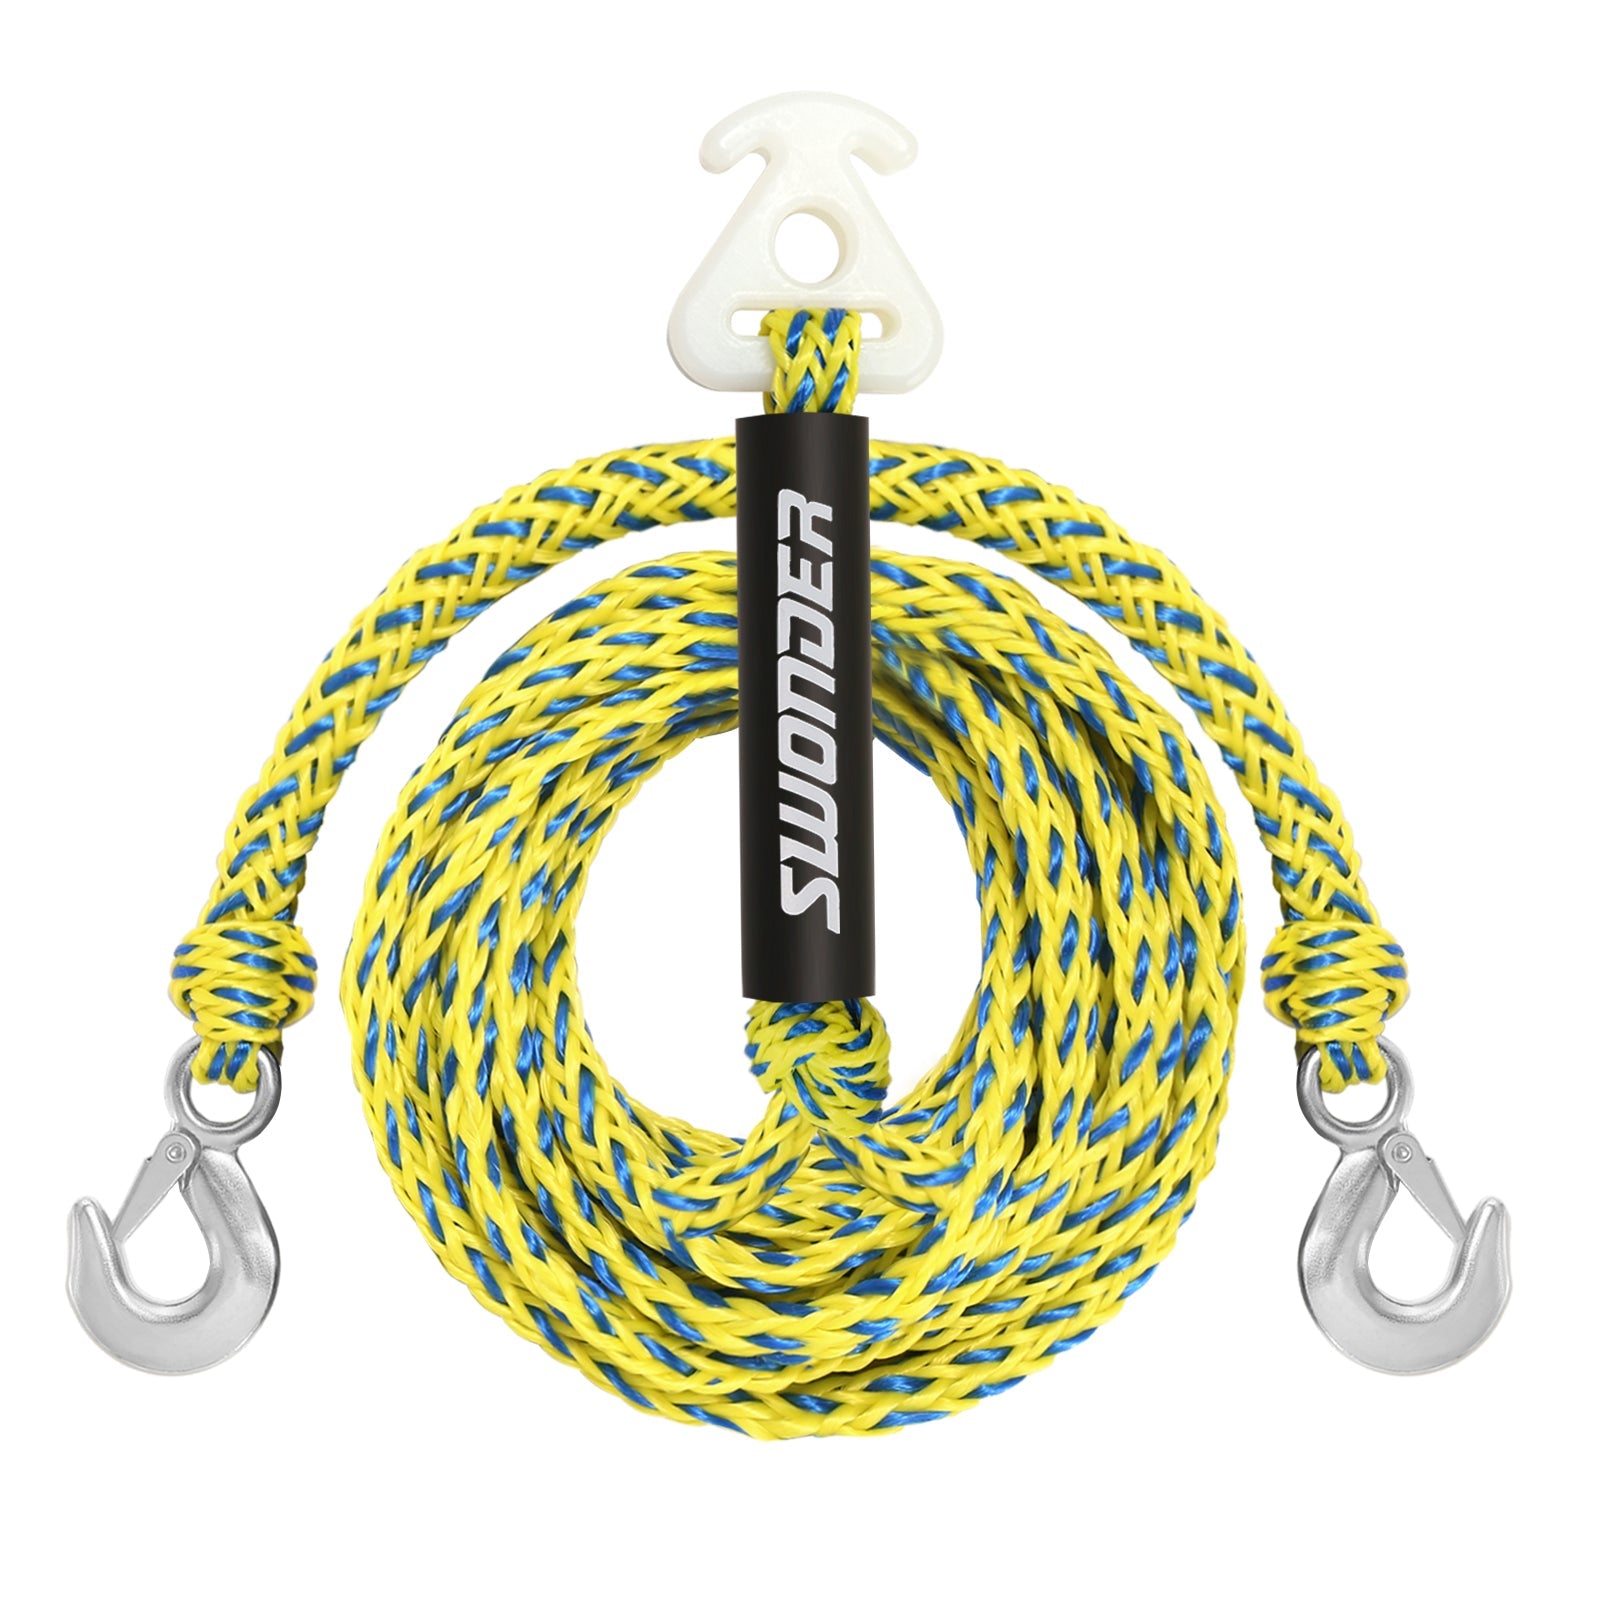 Swonder Boat Tow Harness for Tubing